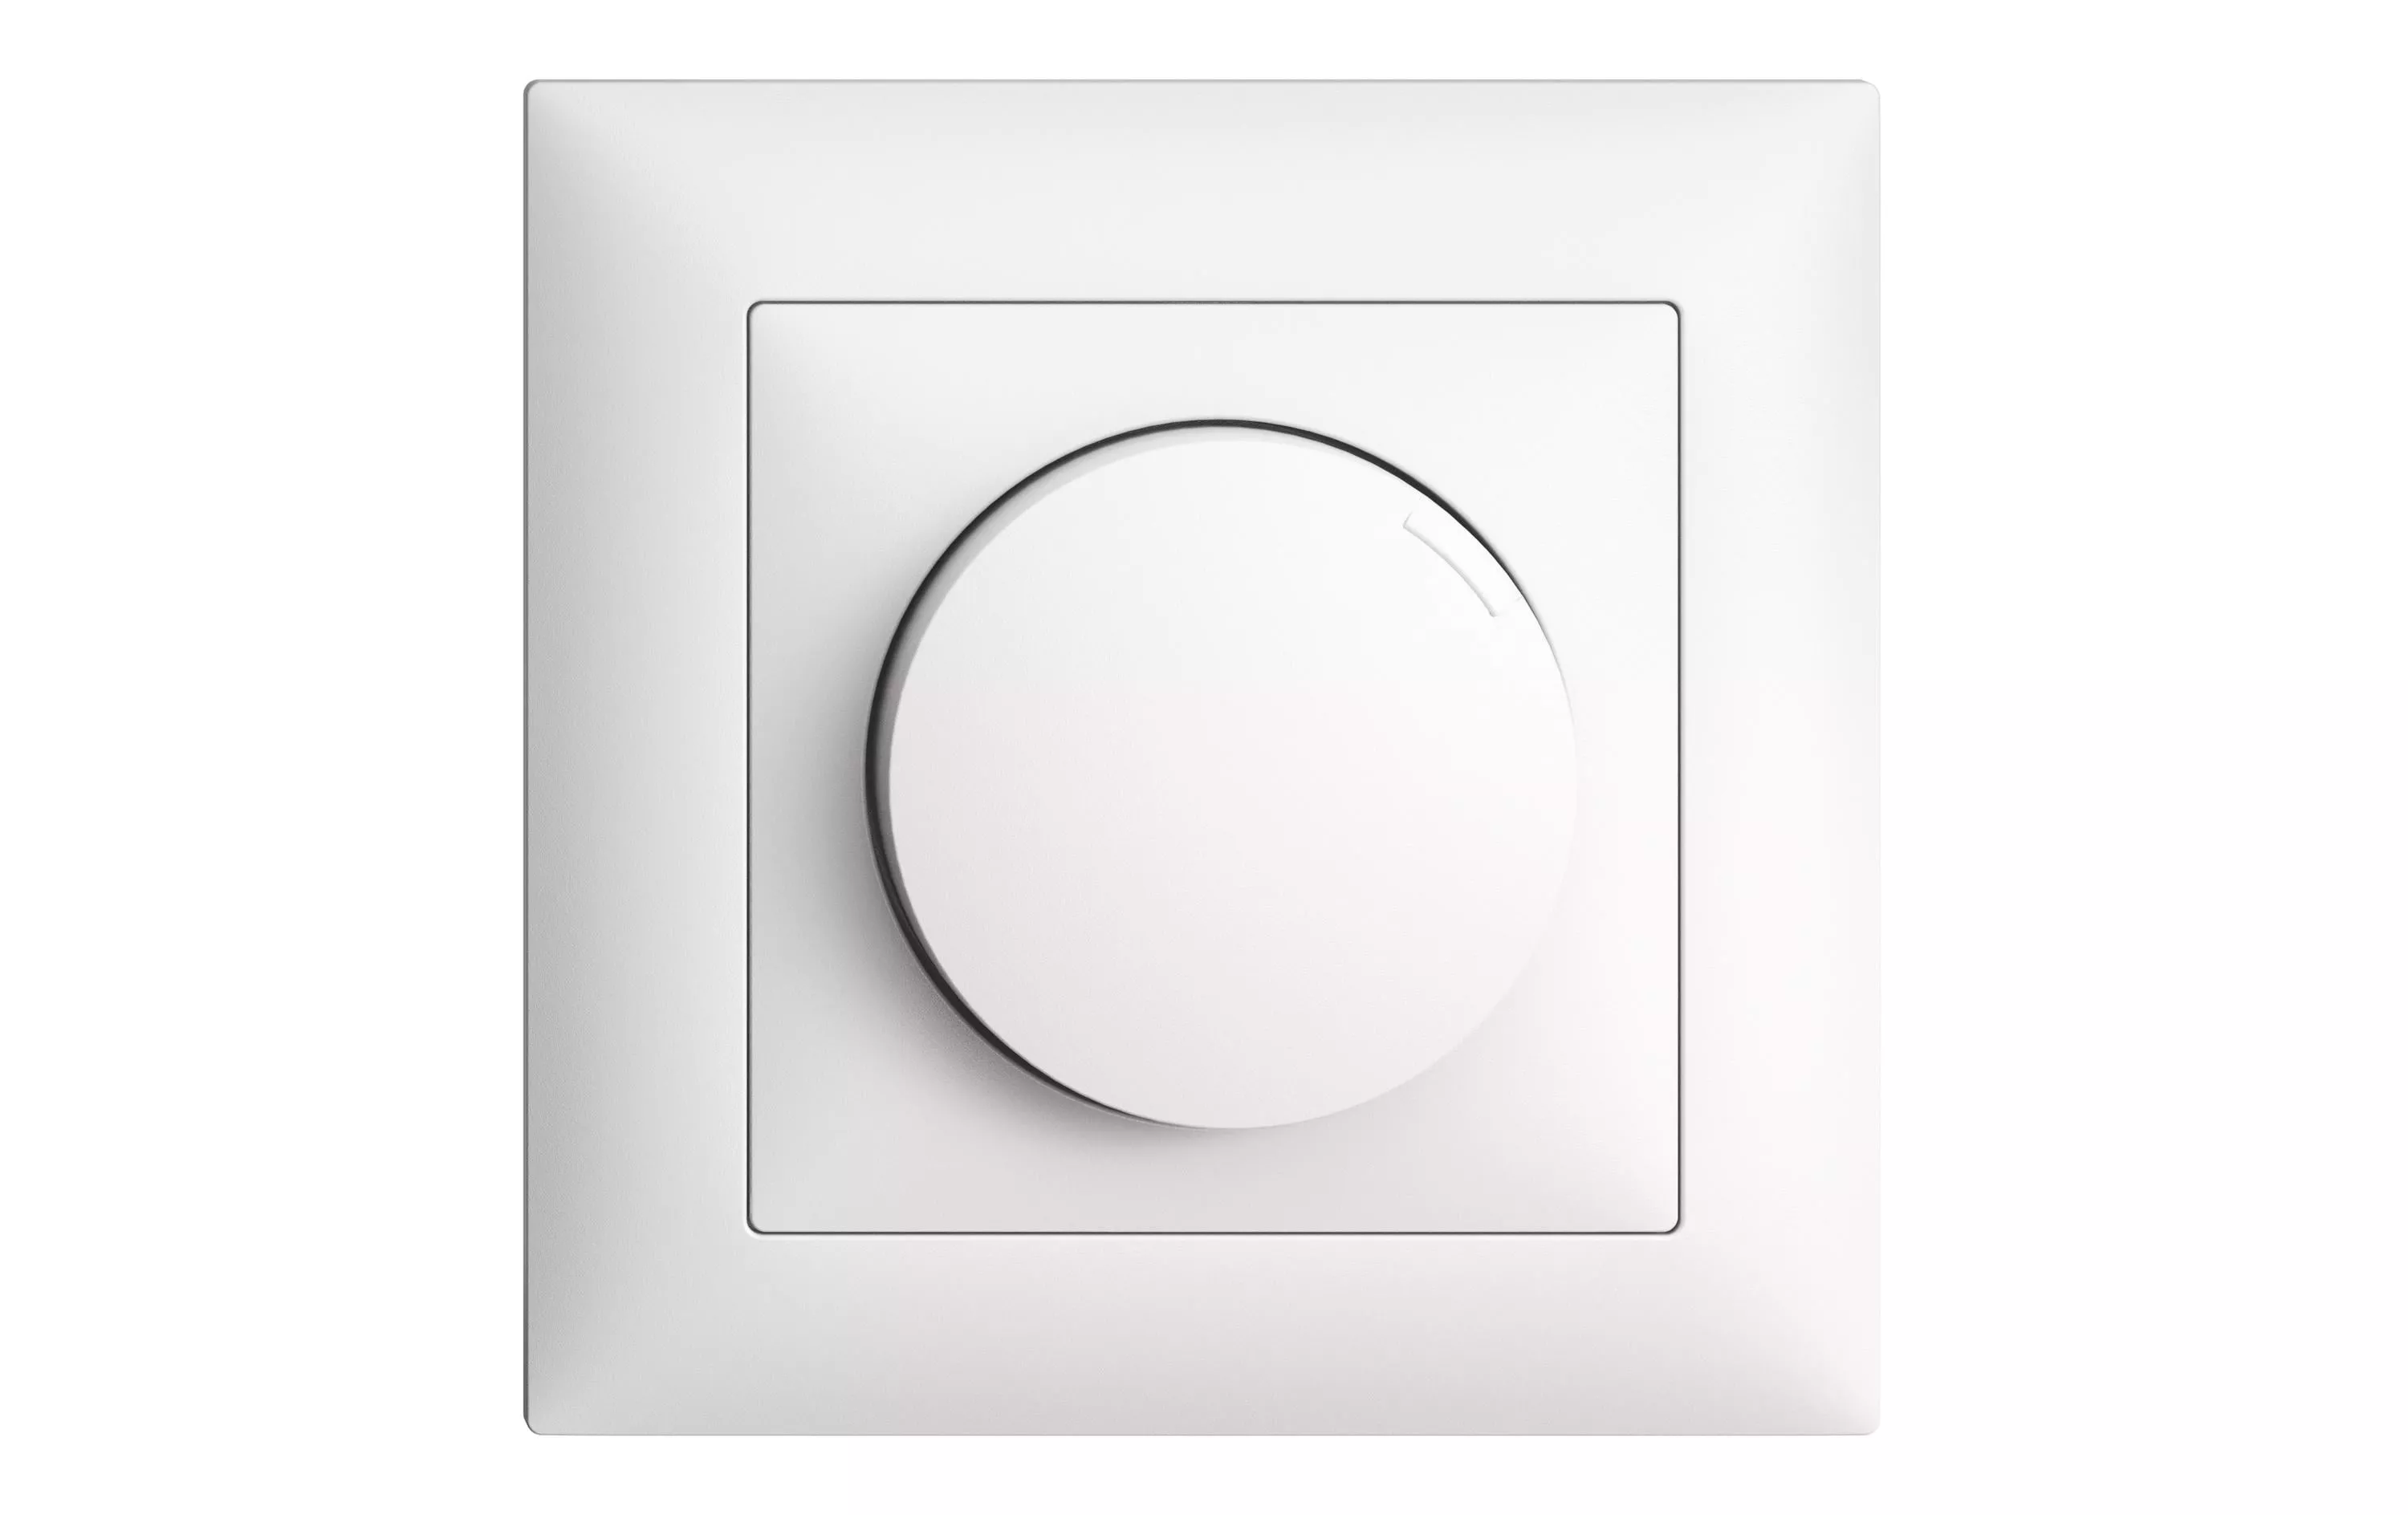 UP-Drehdimmer LED 4 - 400 W  Universal